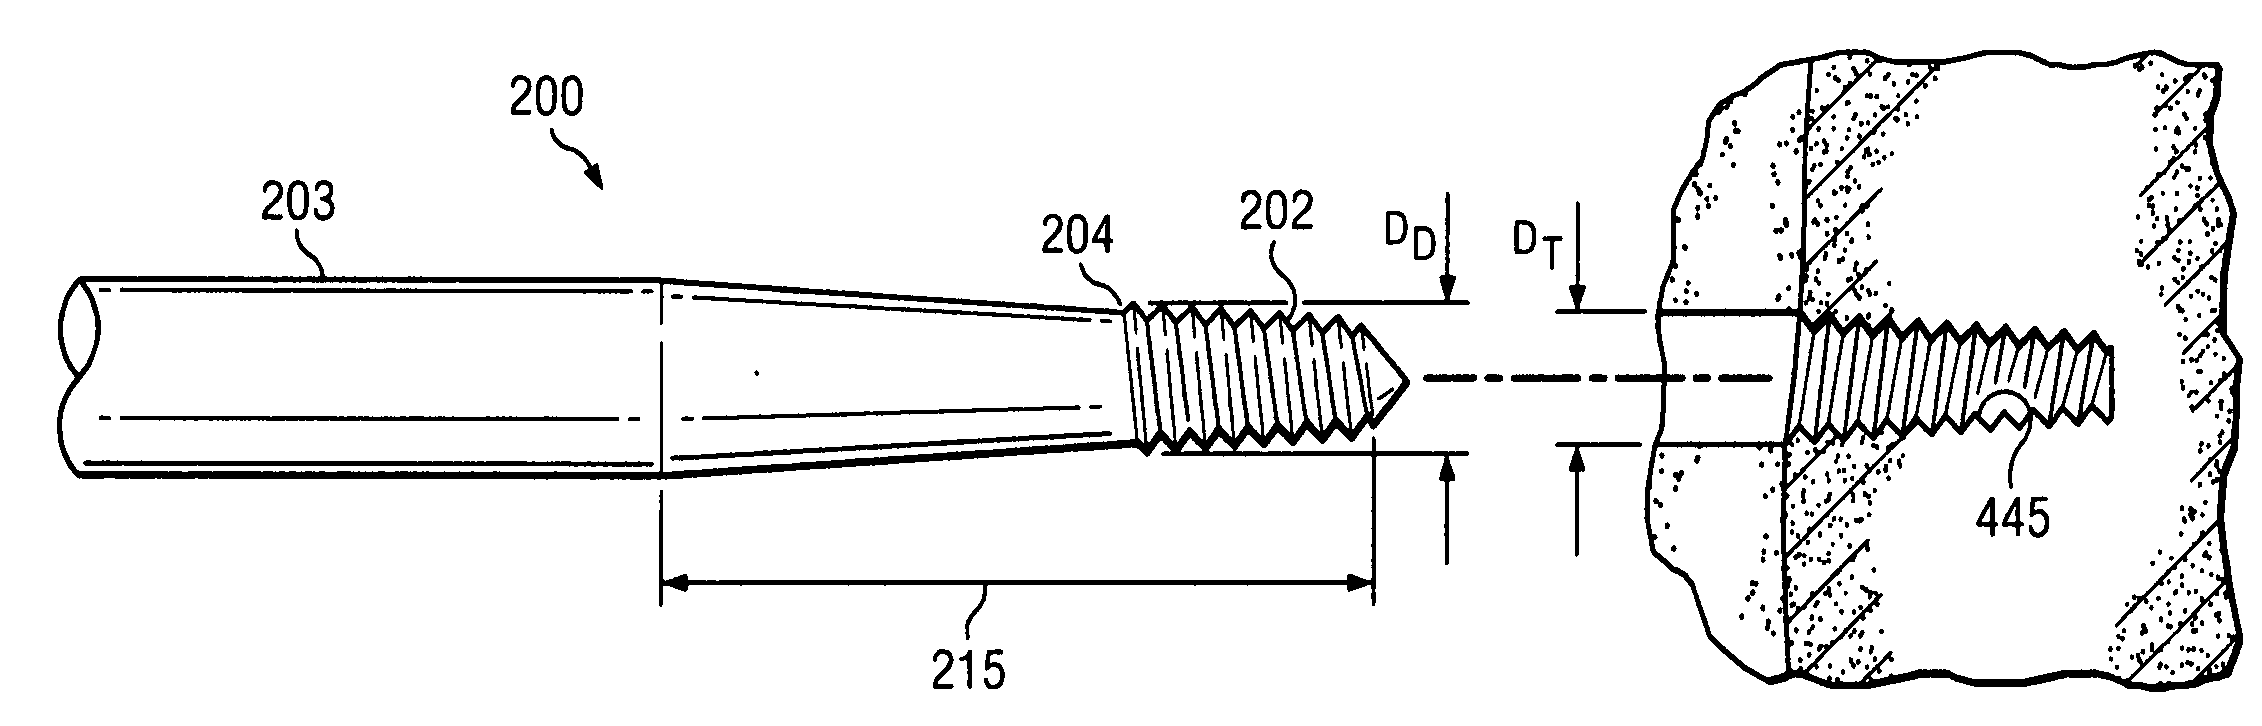 Engaging predetermined radial preloads in securing an orthopedic fastener